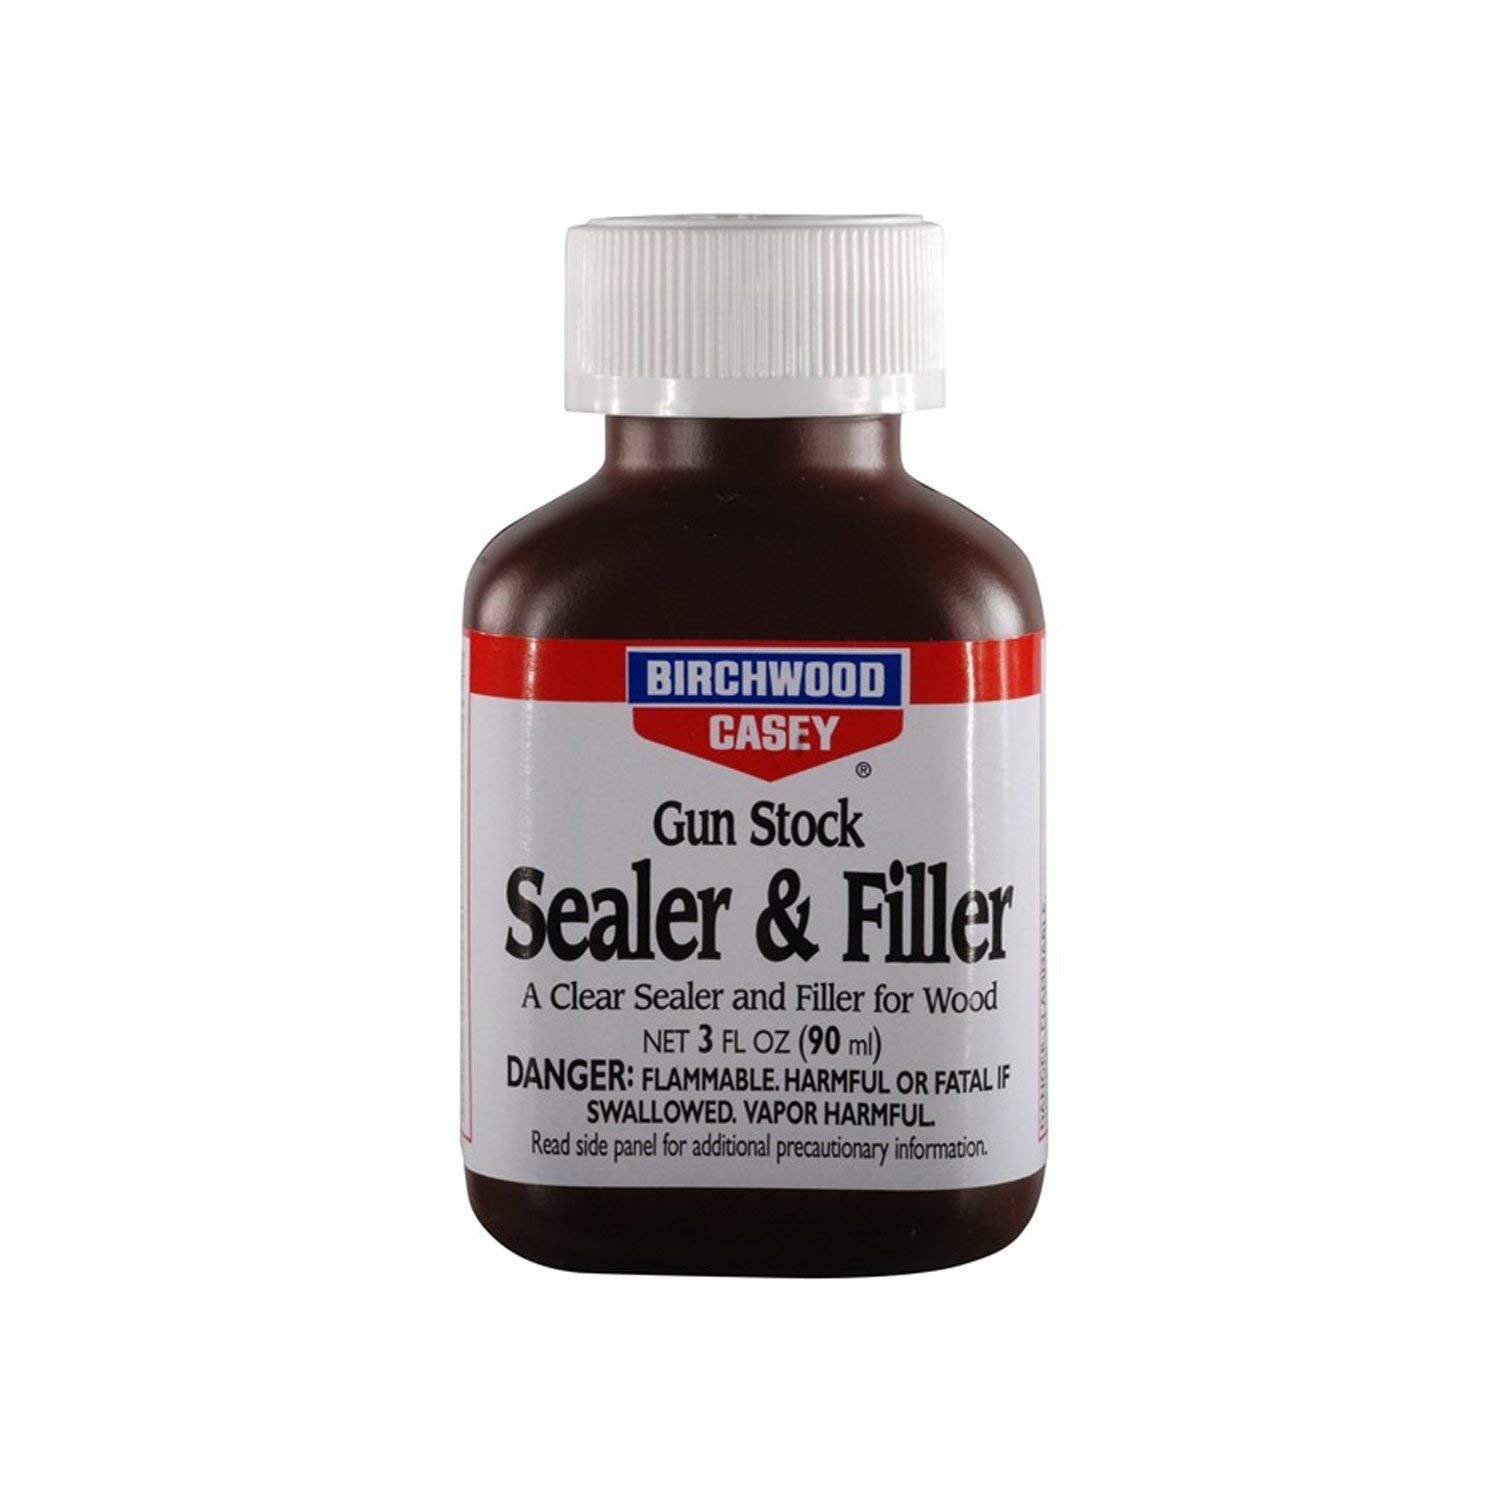 Birchwood Casey Gun Stock Clear Sealer & Filler 3 Oz -  - Mansfield Hunting & Fishing - Products to prepare for Corona Virus